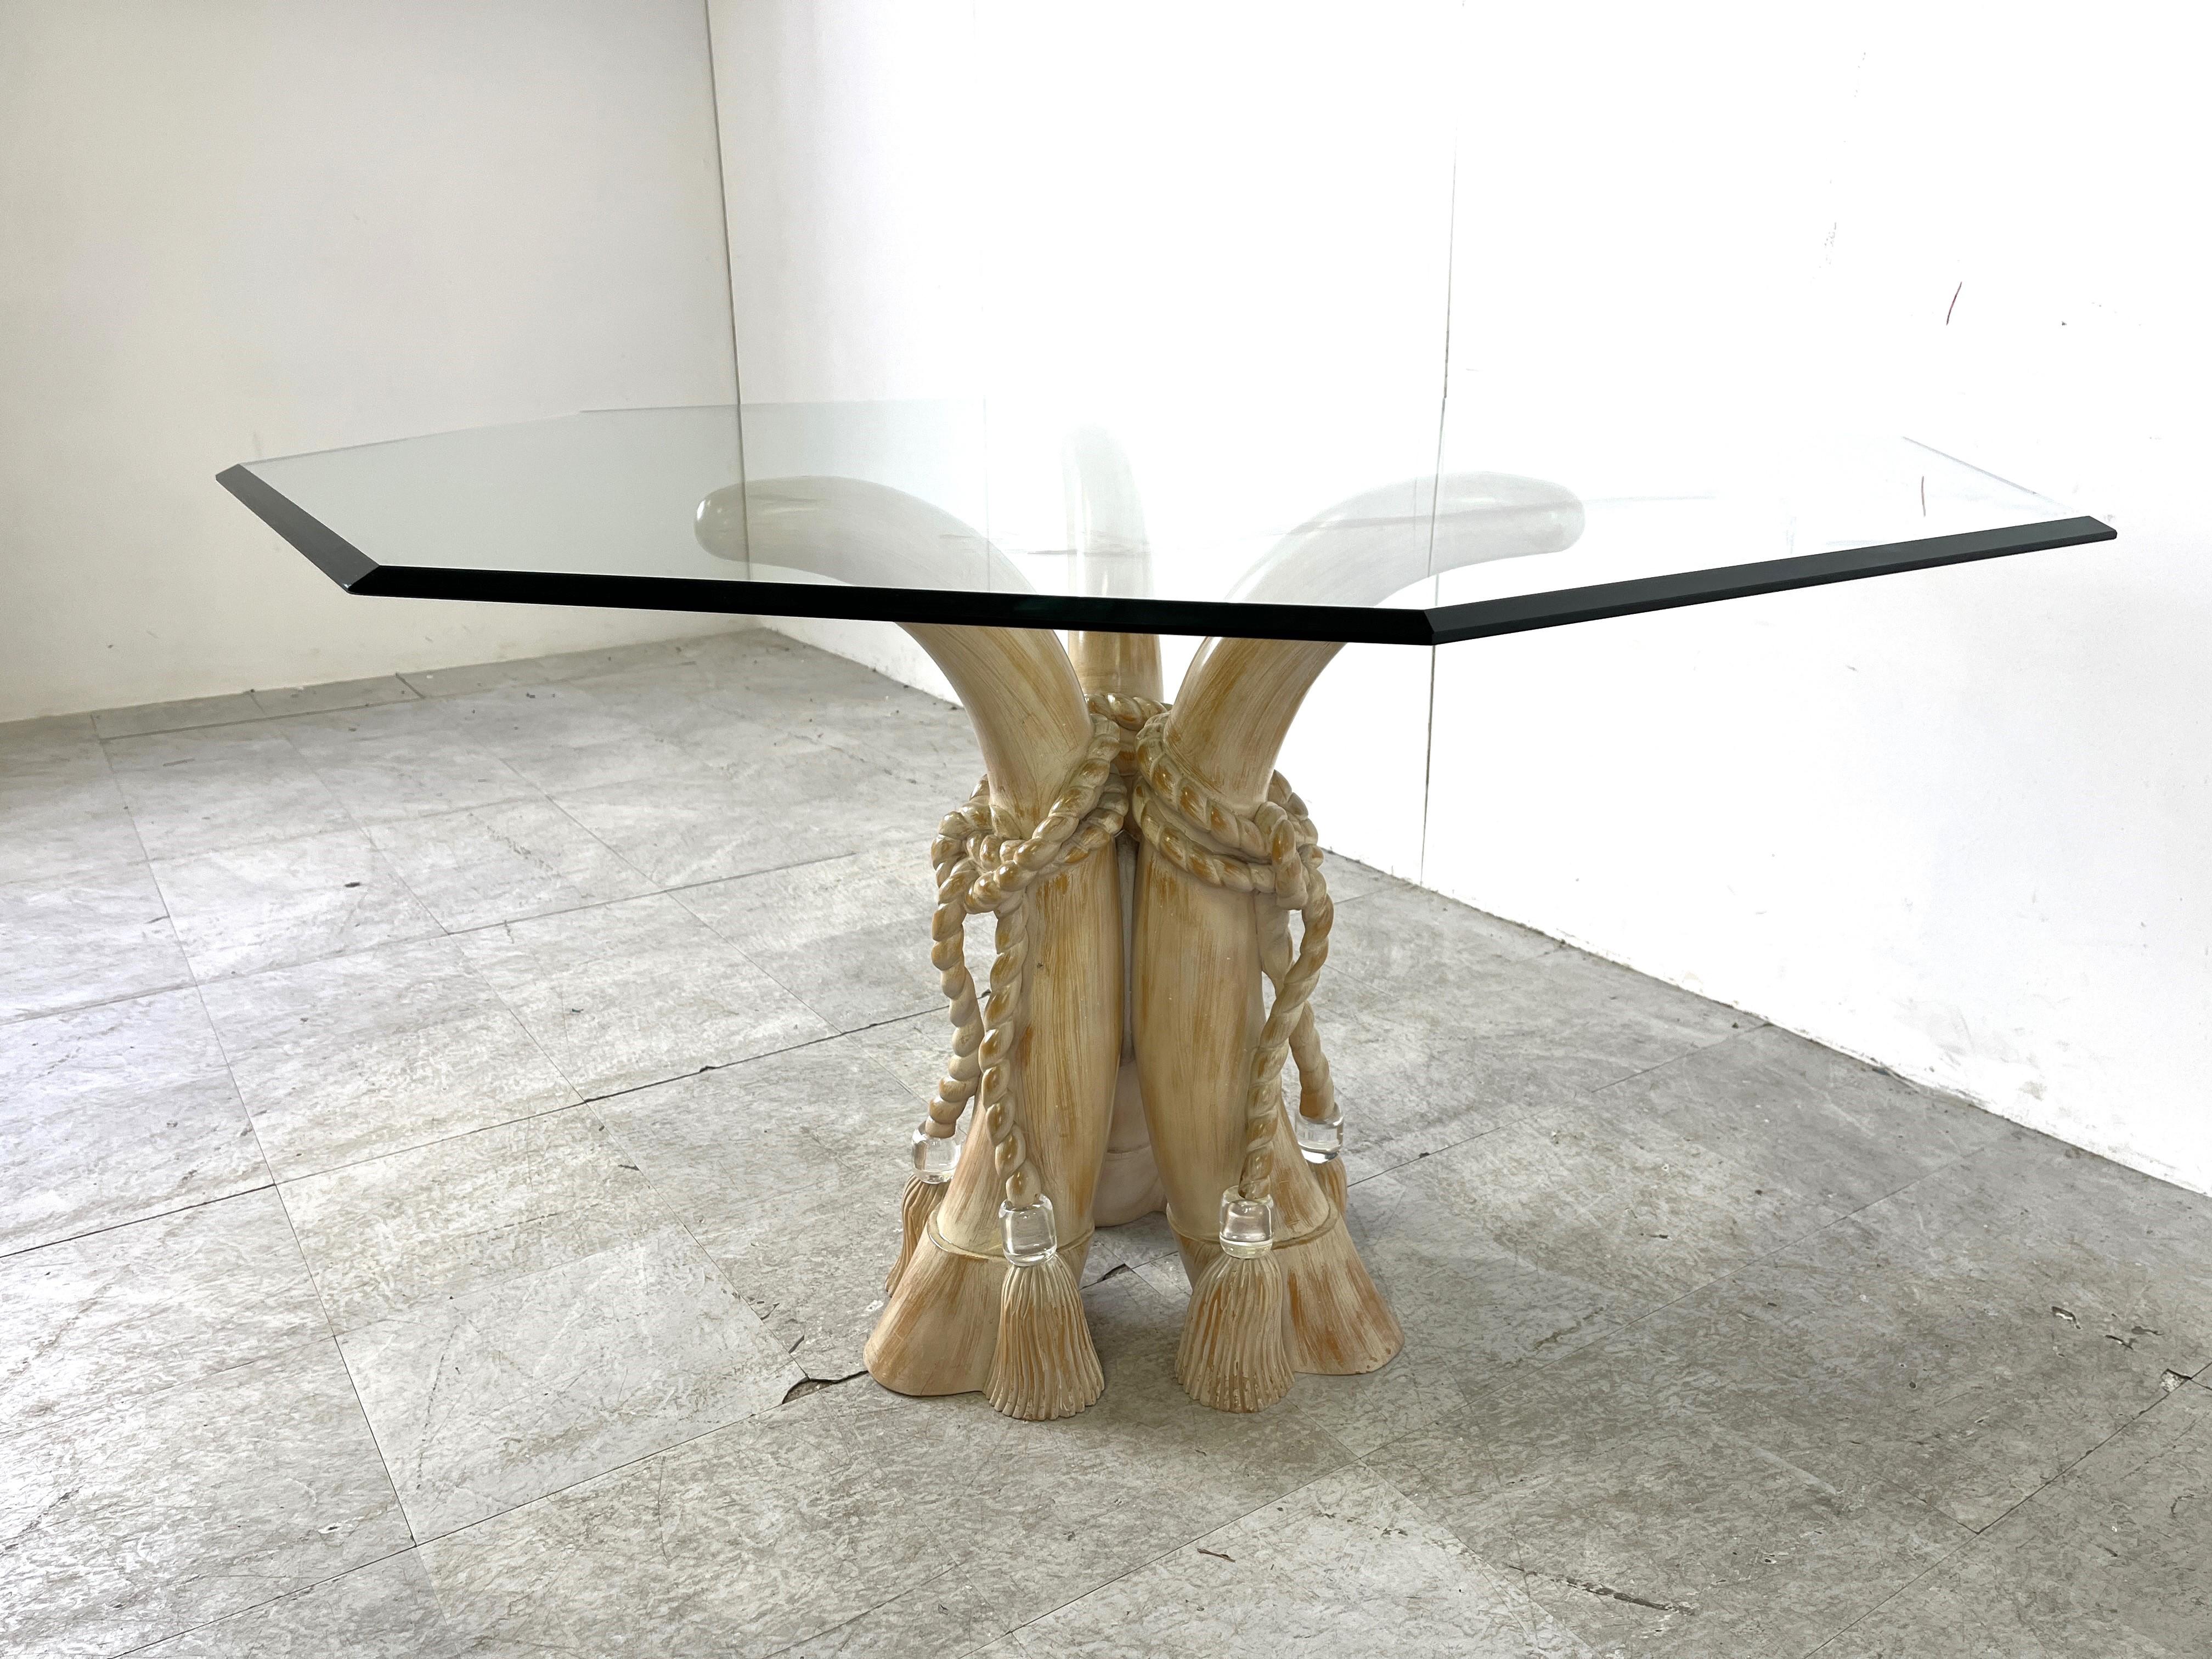 Striking vintage faux tusk dining table made from resin and wood with lucite and a beveled octogonal glass table top.

Nicely detailed tusks and cords.

Eye catching dining table in very good condition

1970s - Italy

Height: 75cm/29.52